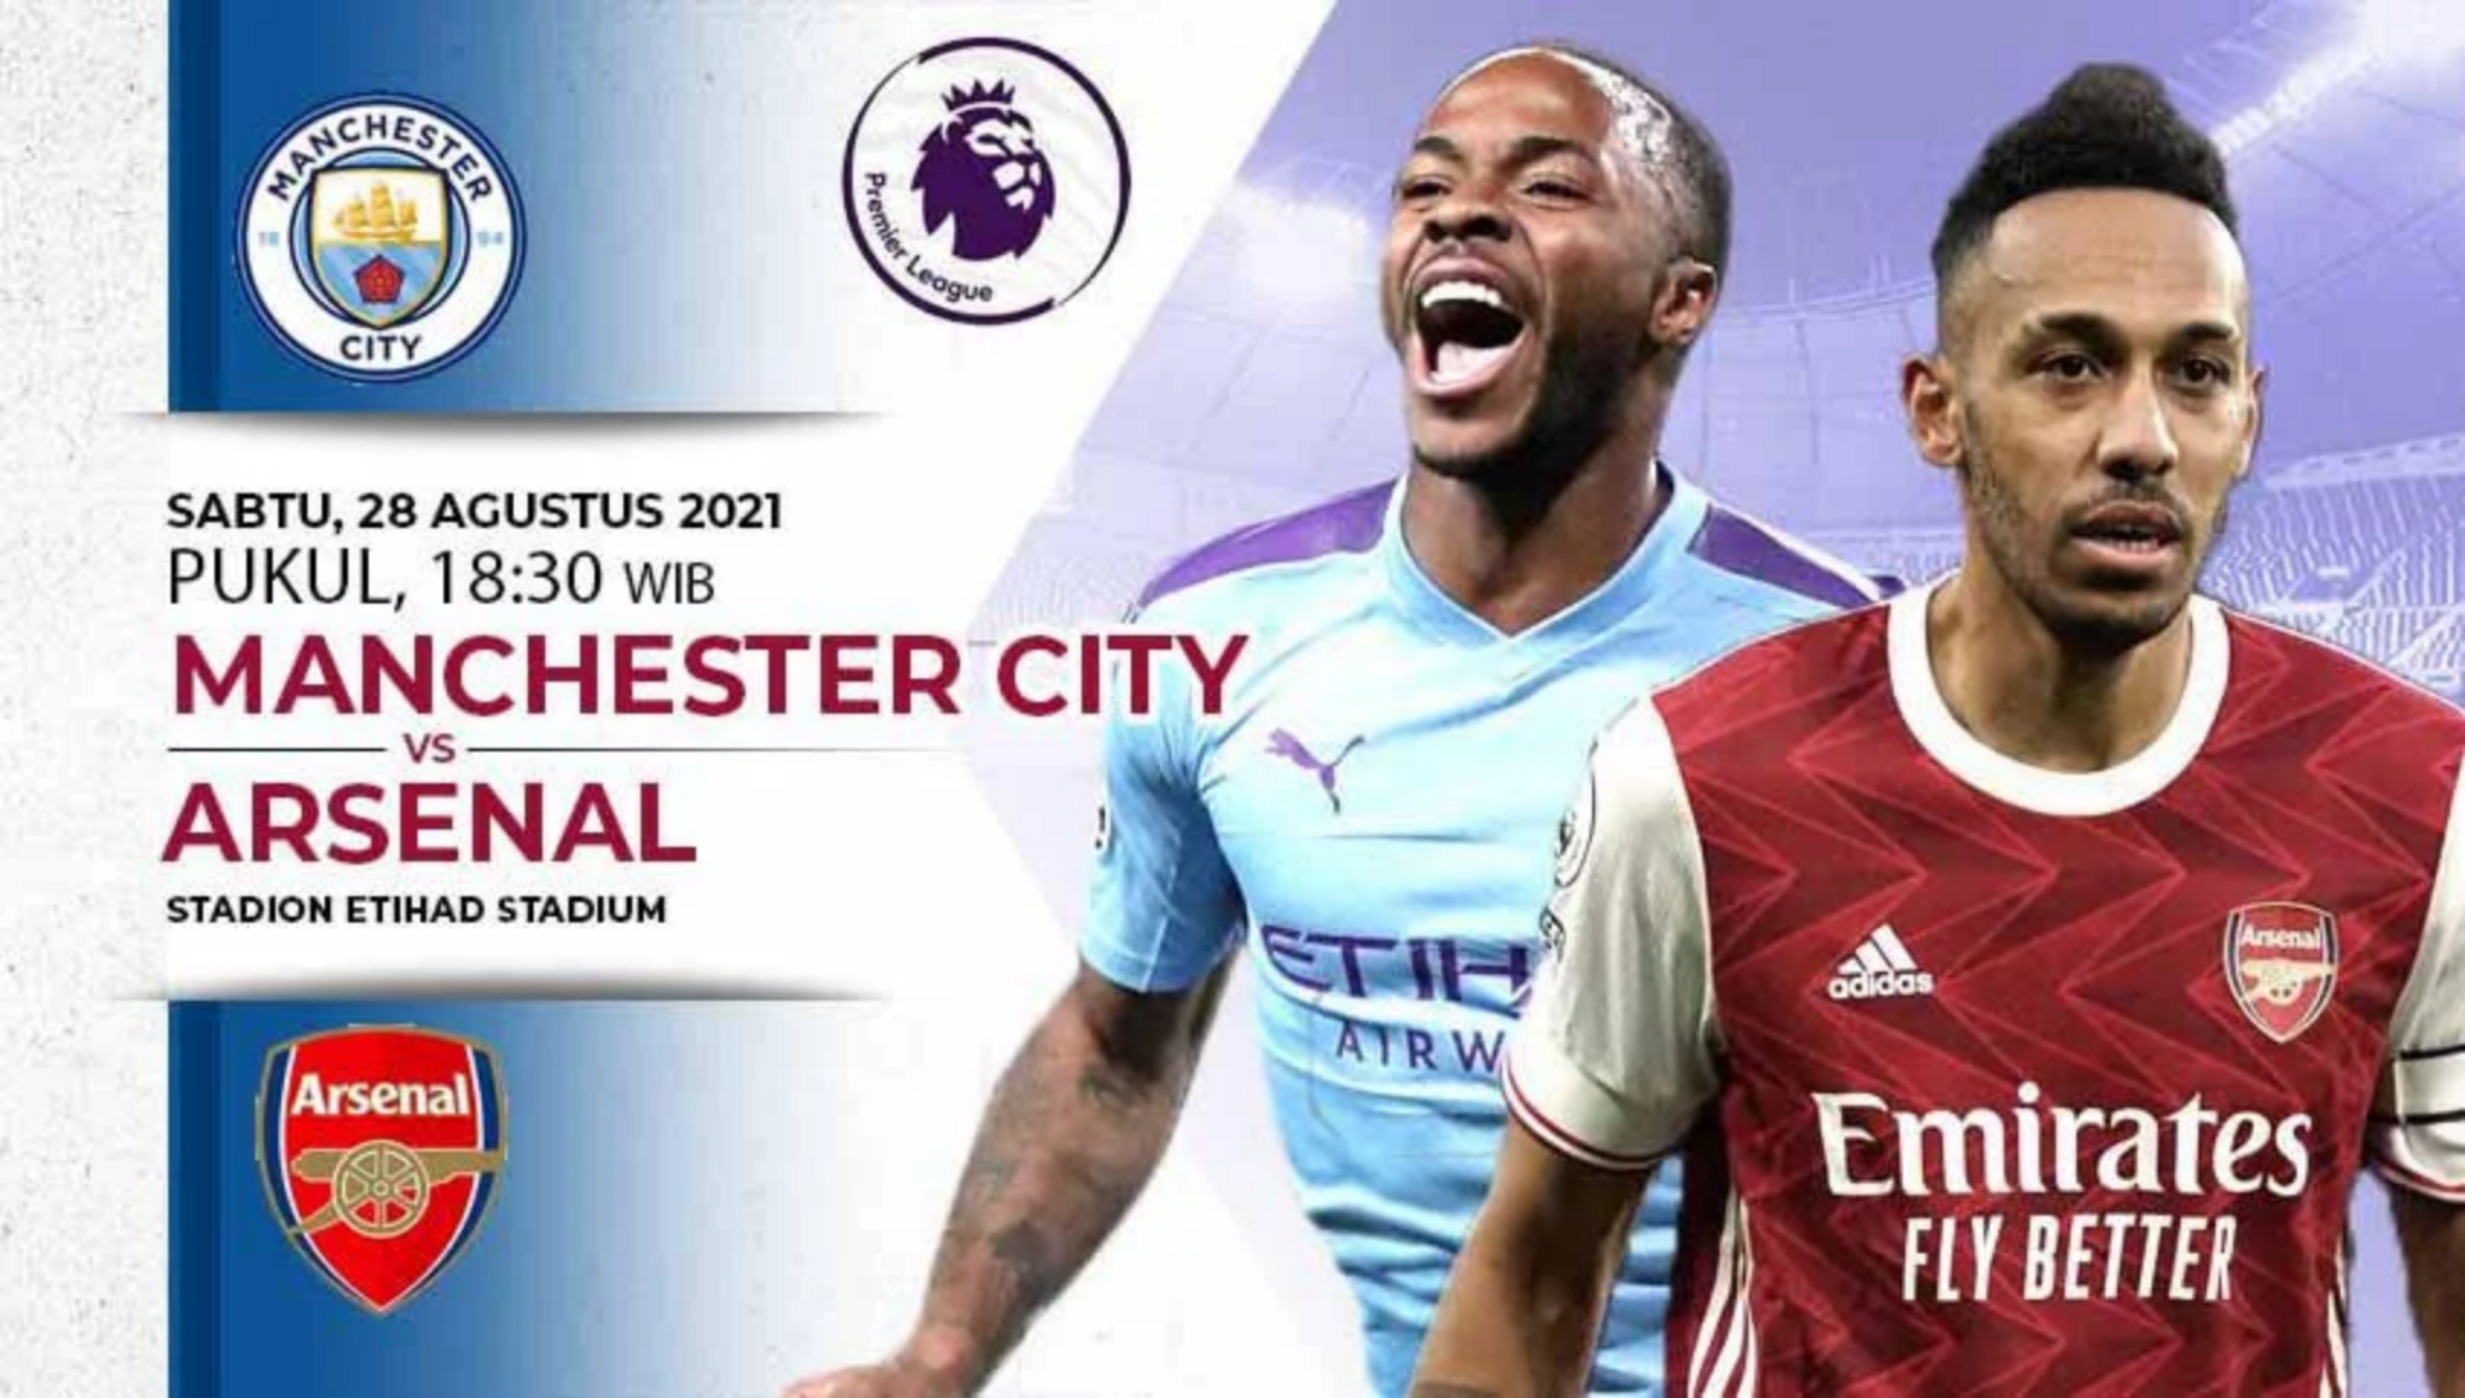 Live Streaming Manchester City vs Arsenal, 28 Agustus 2021